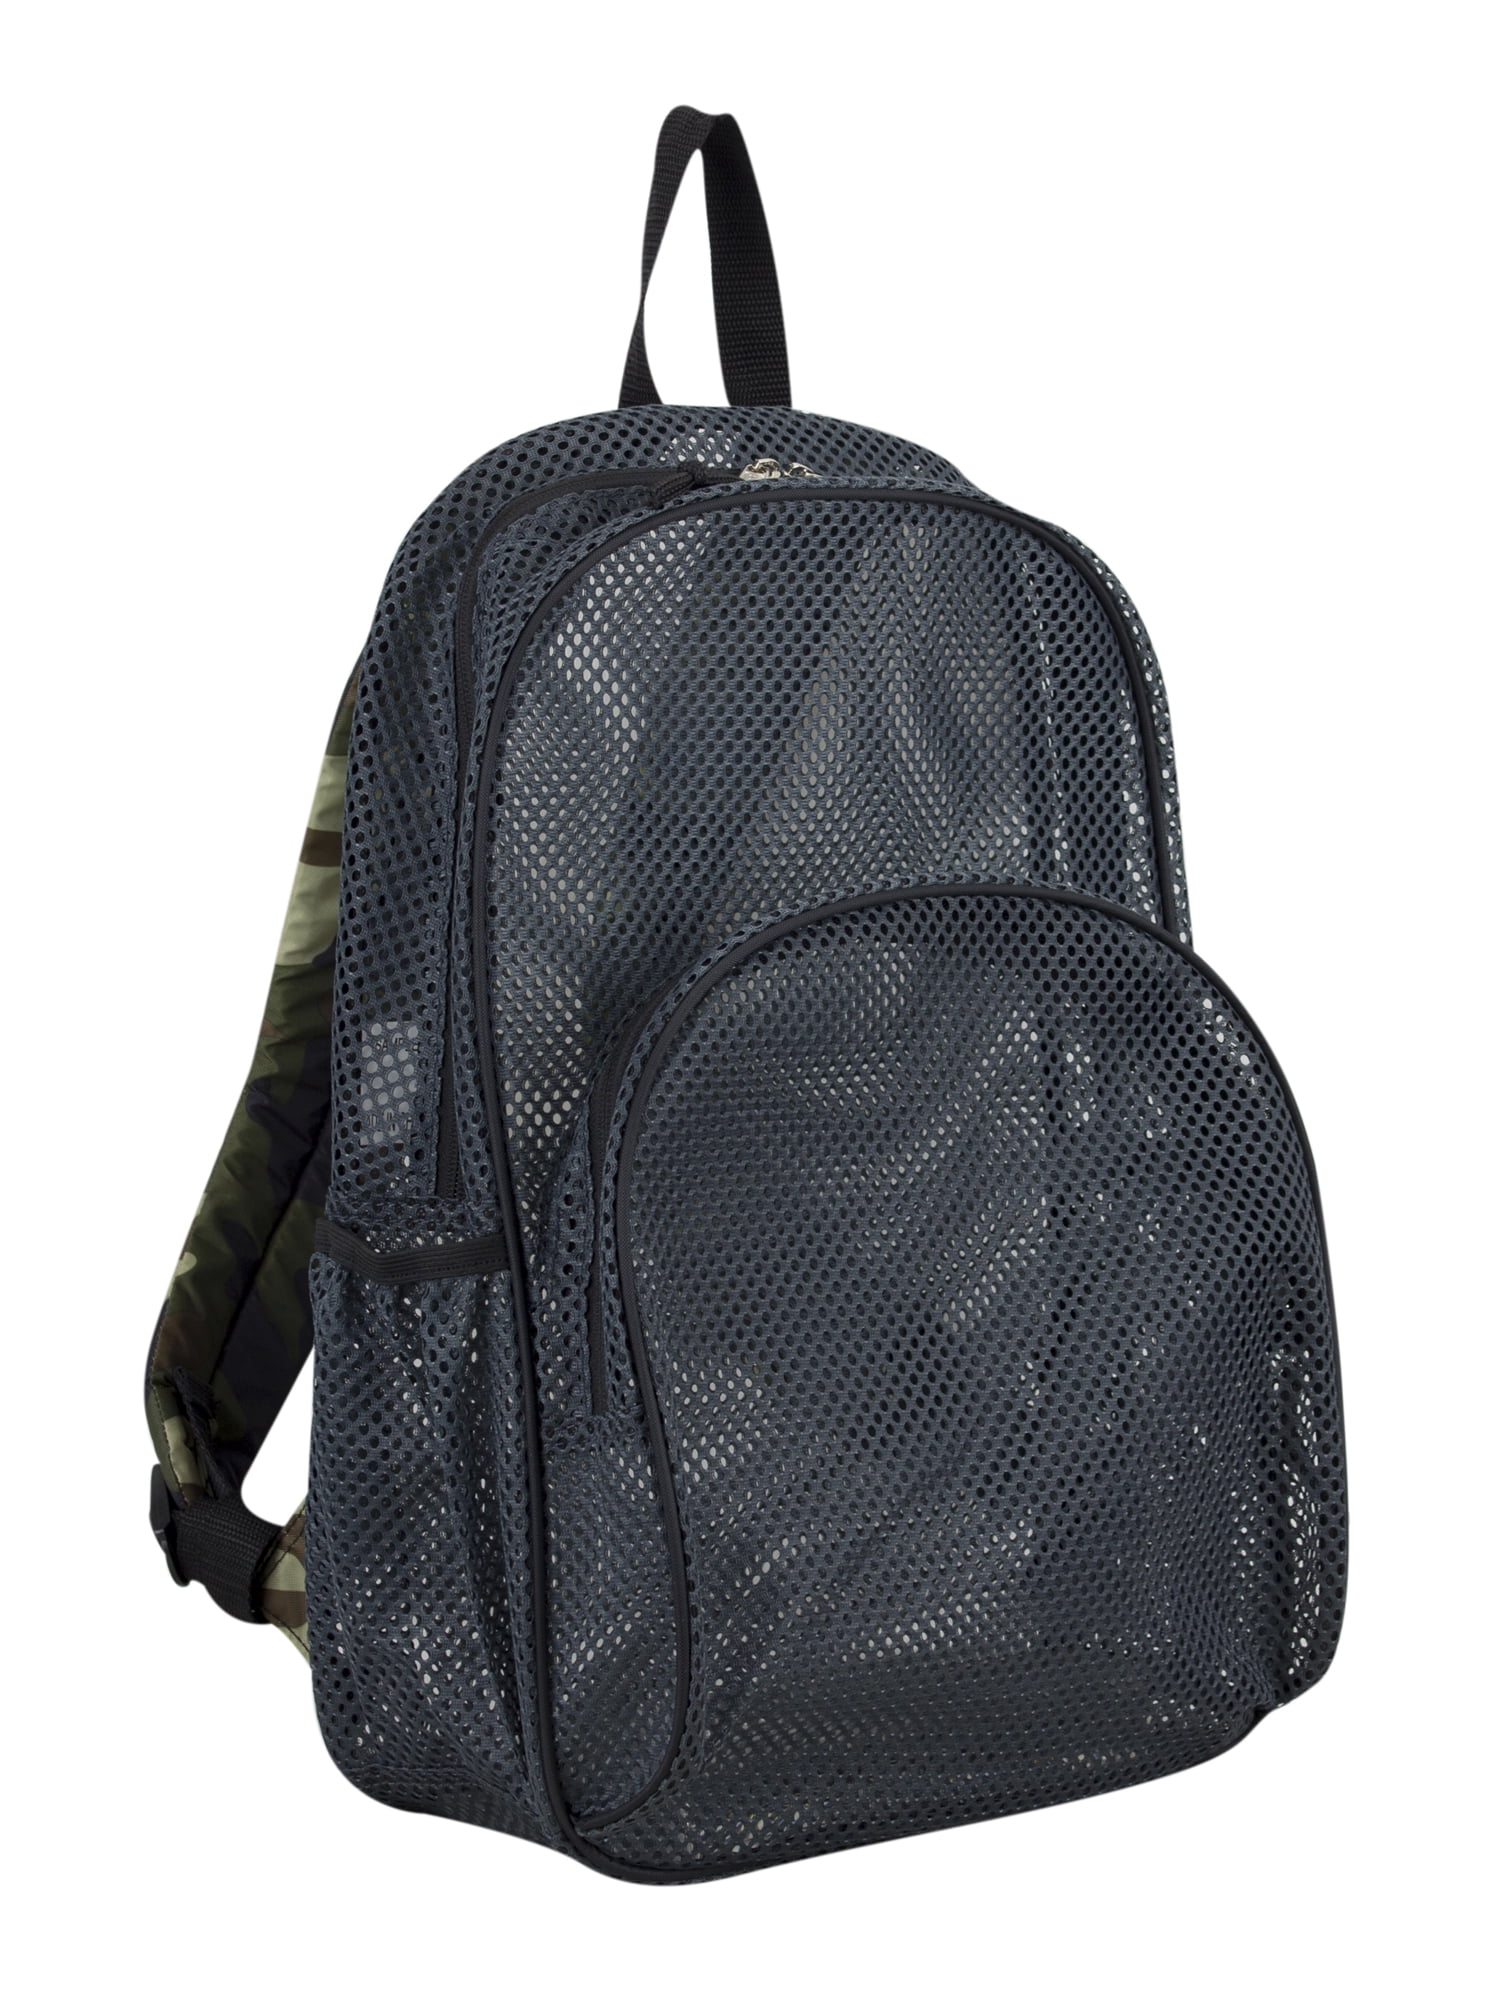 COMPARTMENT SPORTS BACKPACK SMARTBAG 40